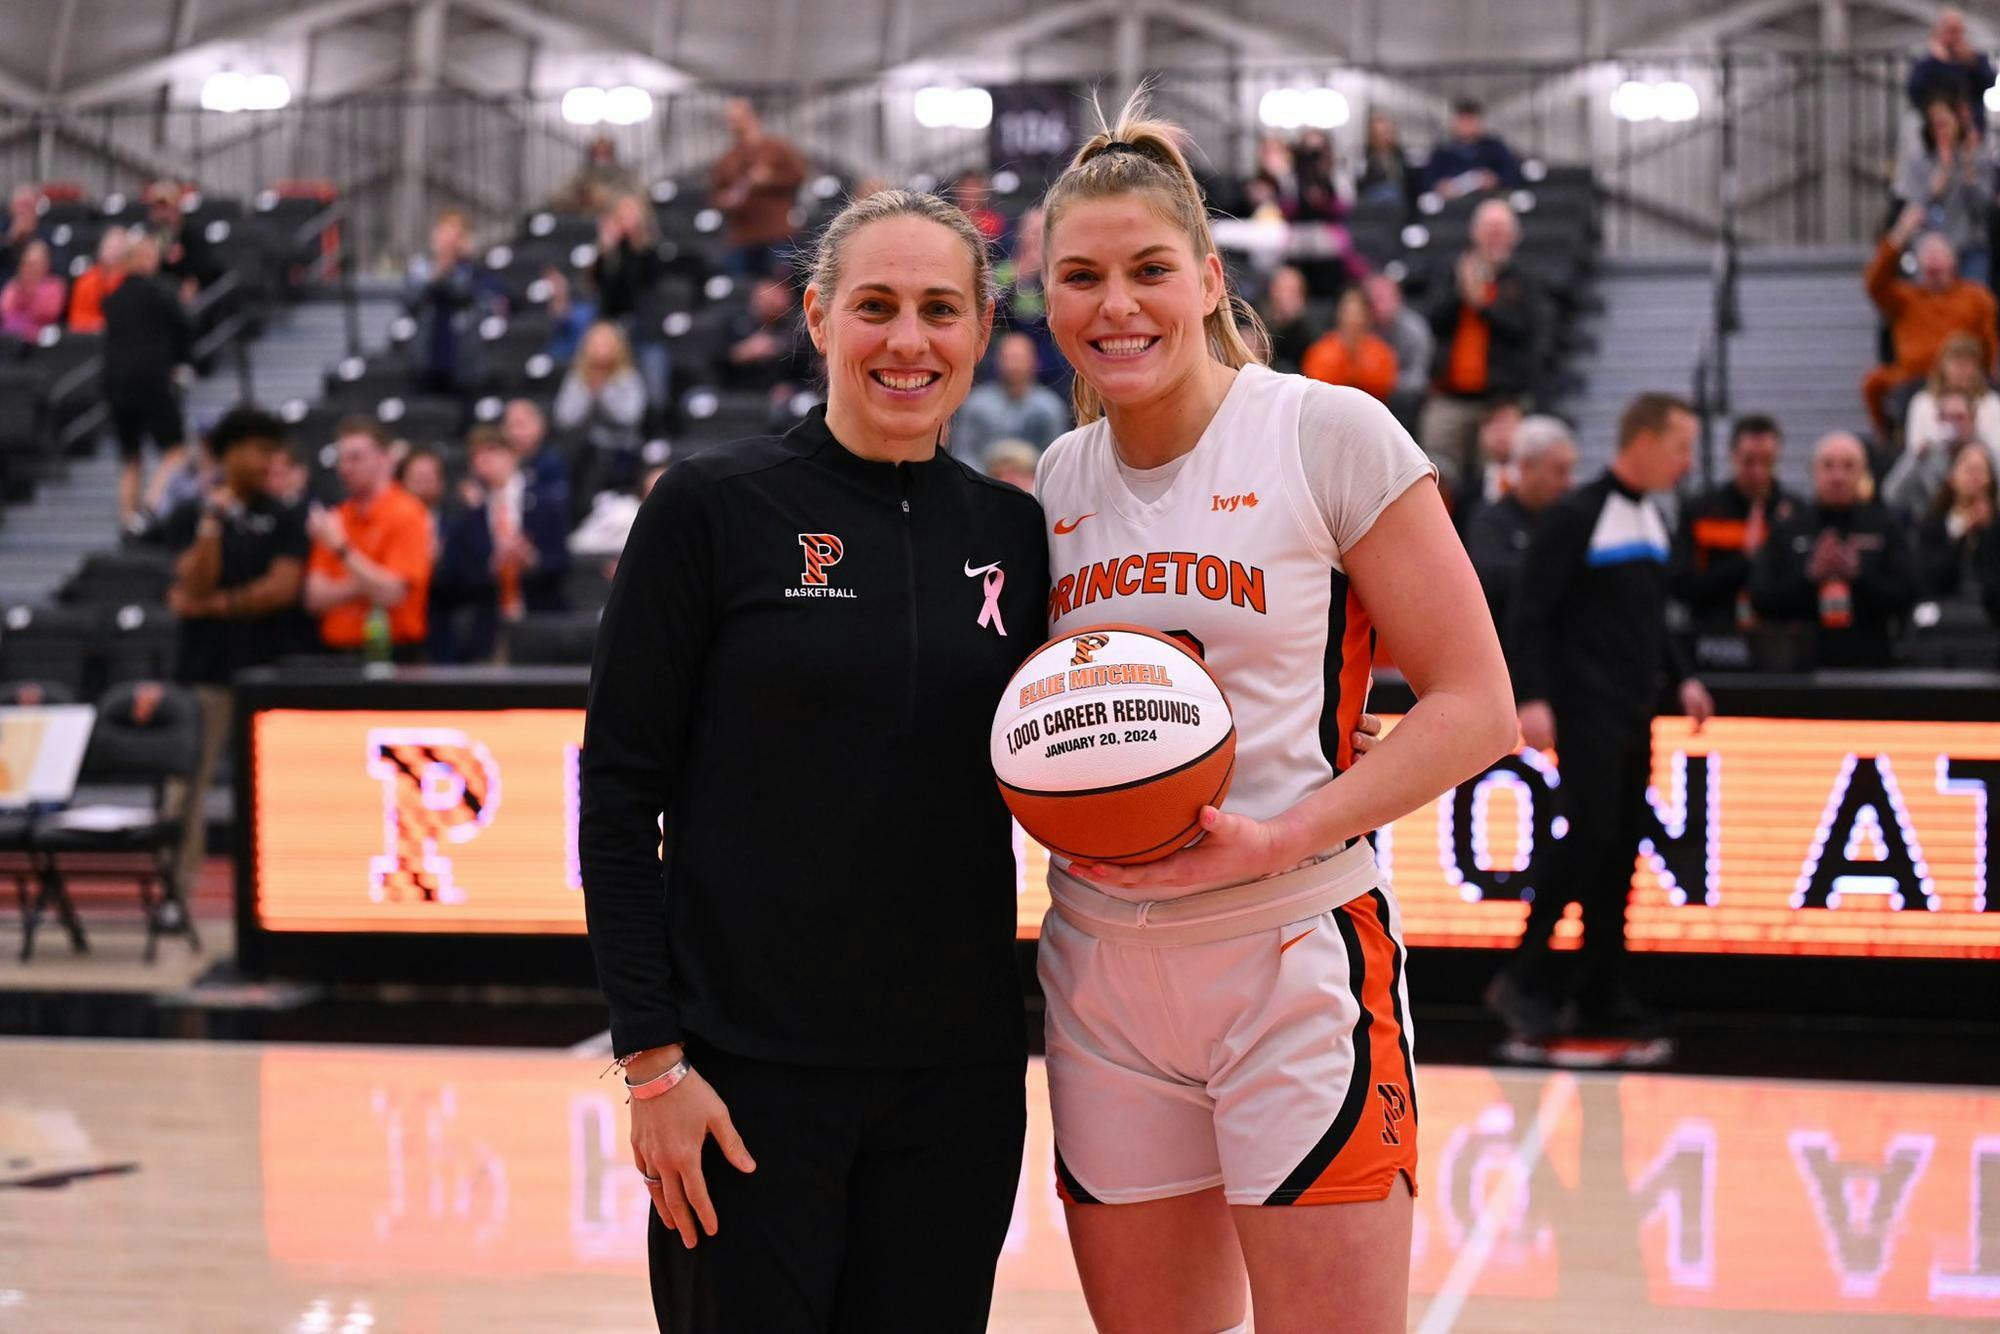 Ellie Mitchell holds white ball in front of Princeton crowd.